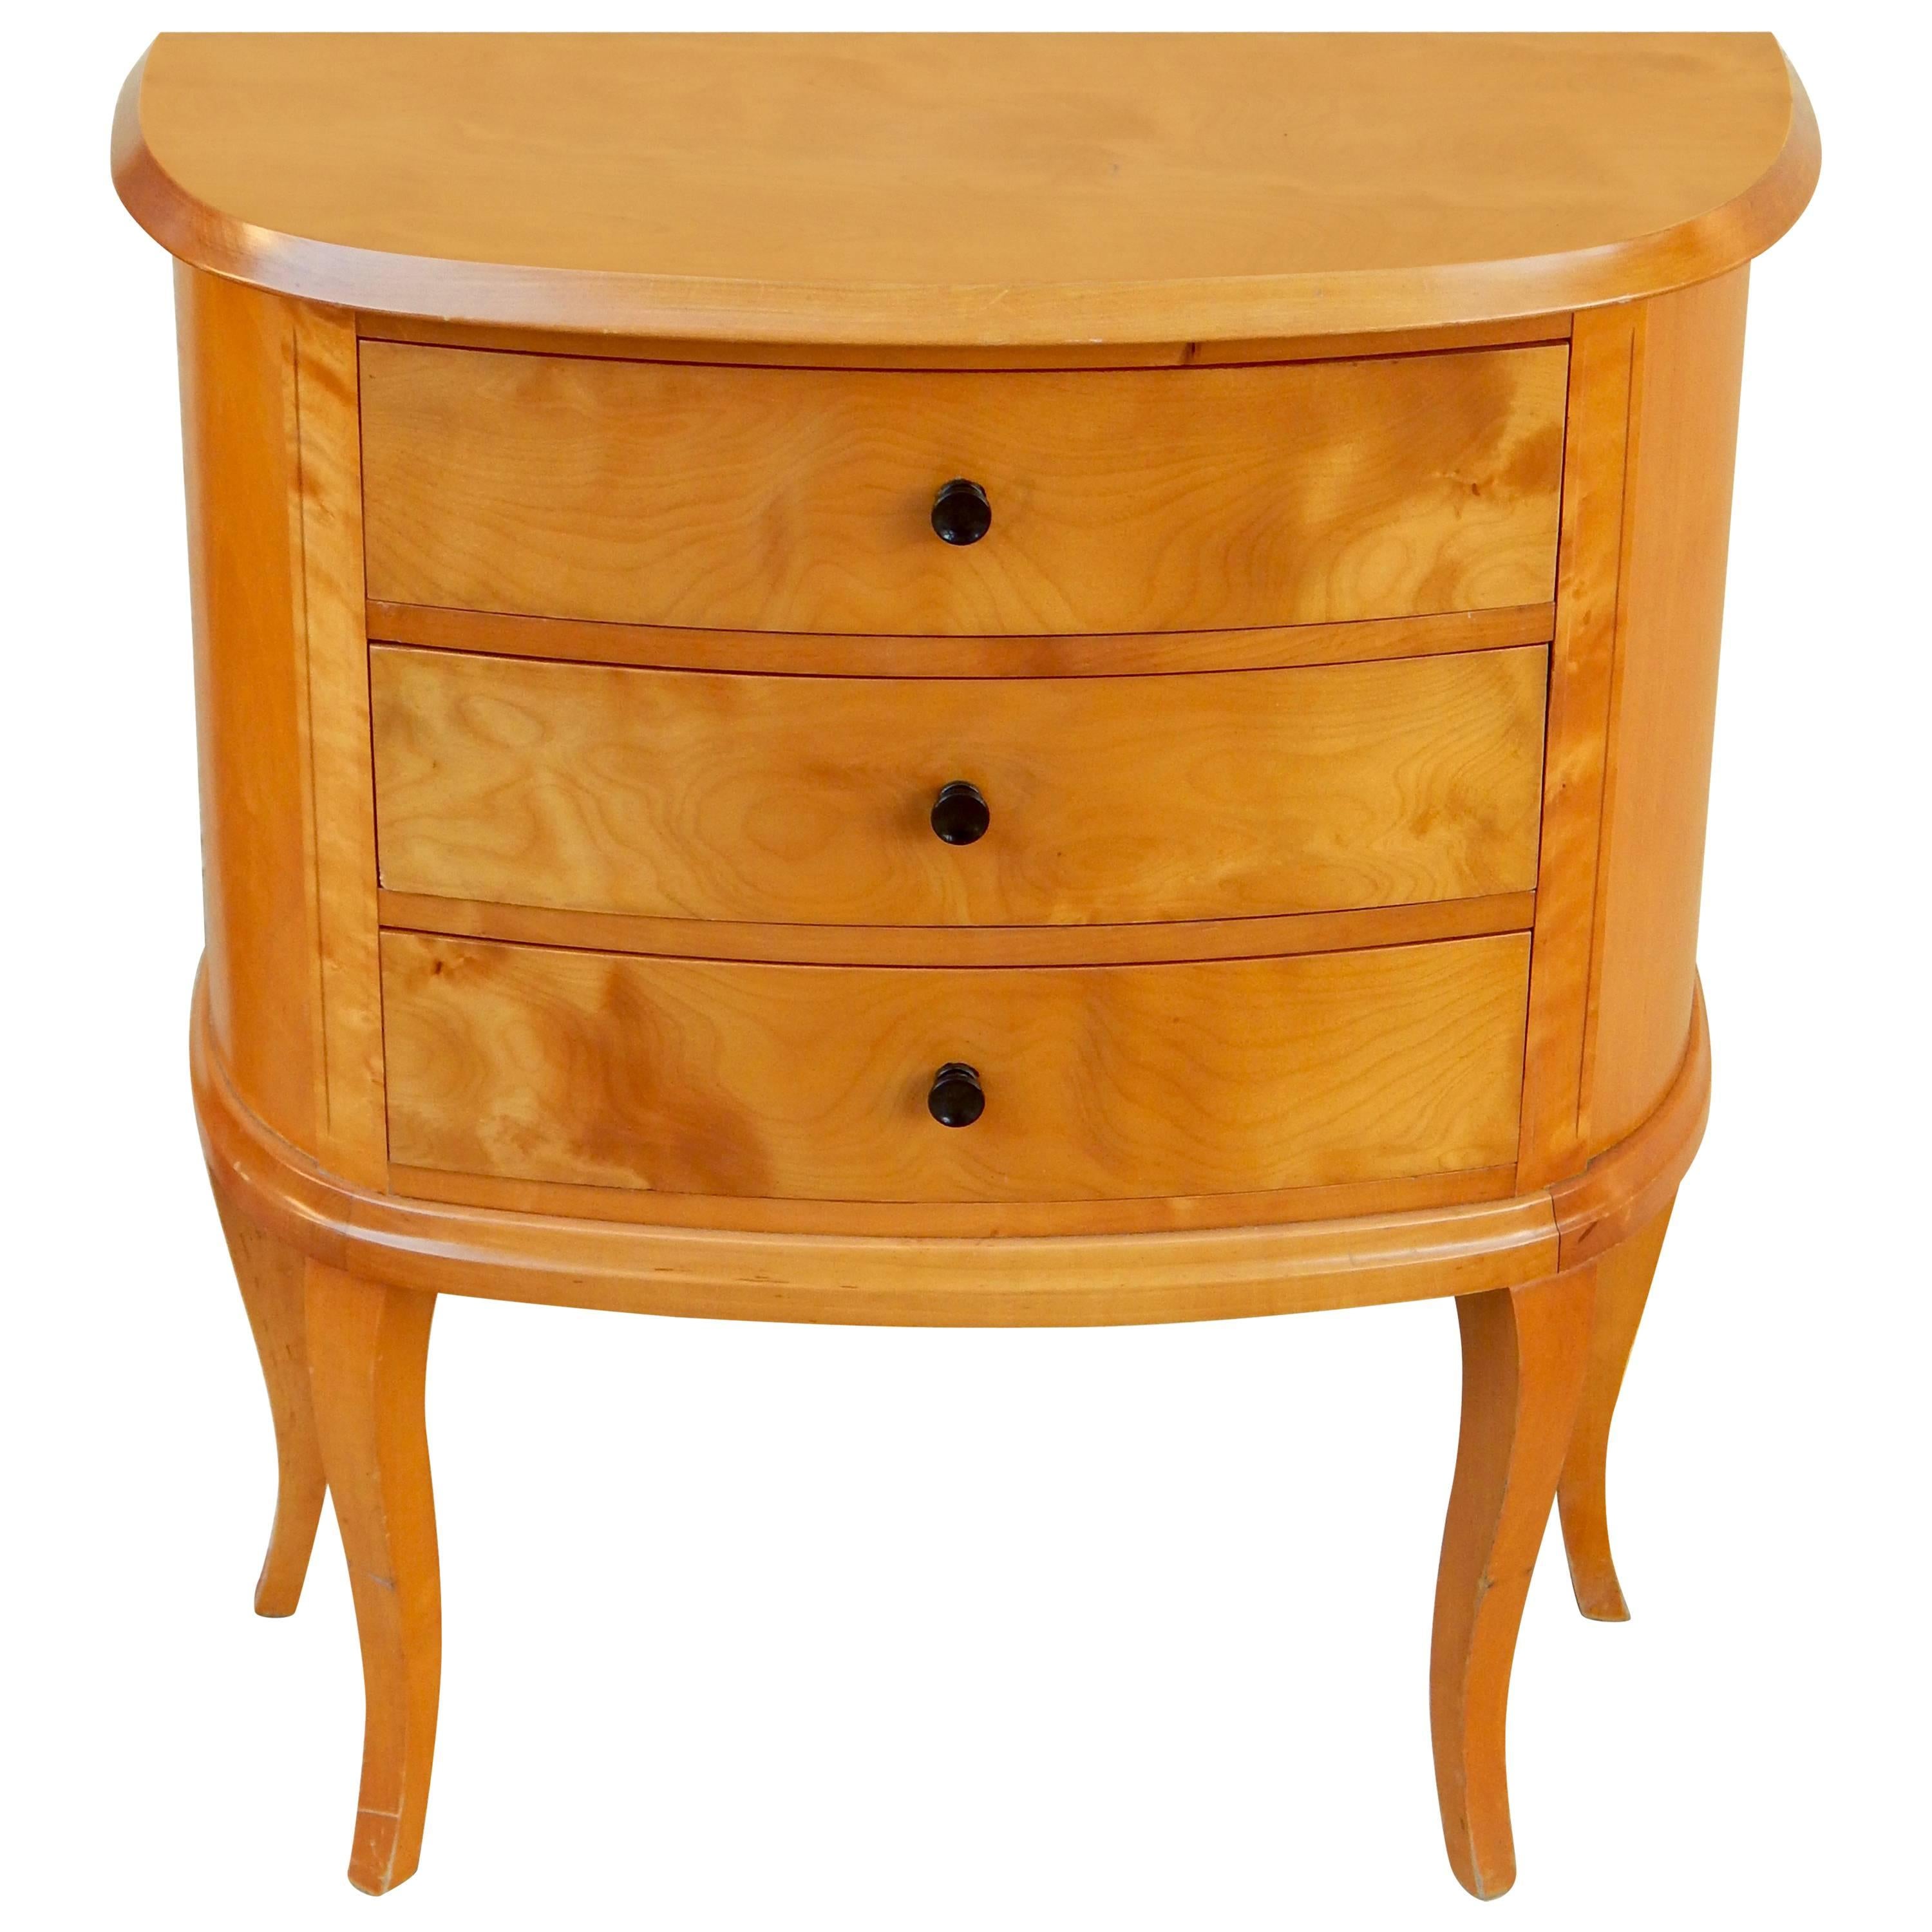 Swedish Art Deco Demilune Side Table in Golden Flame Birch, circa 1930 For Sale